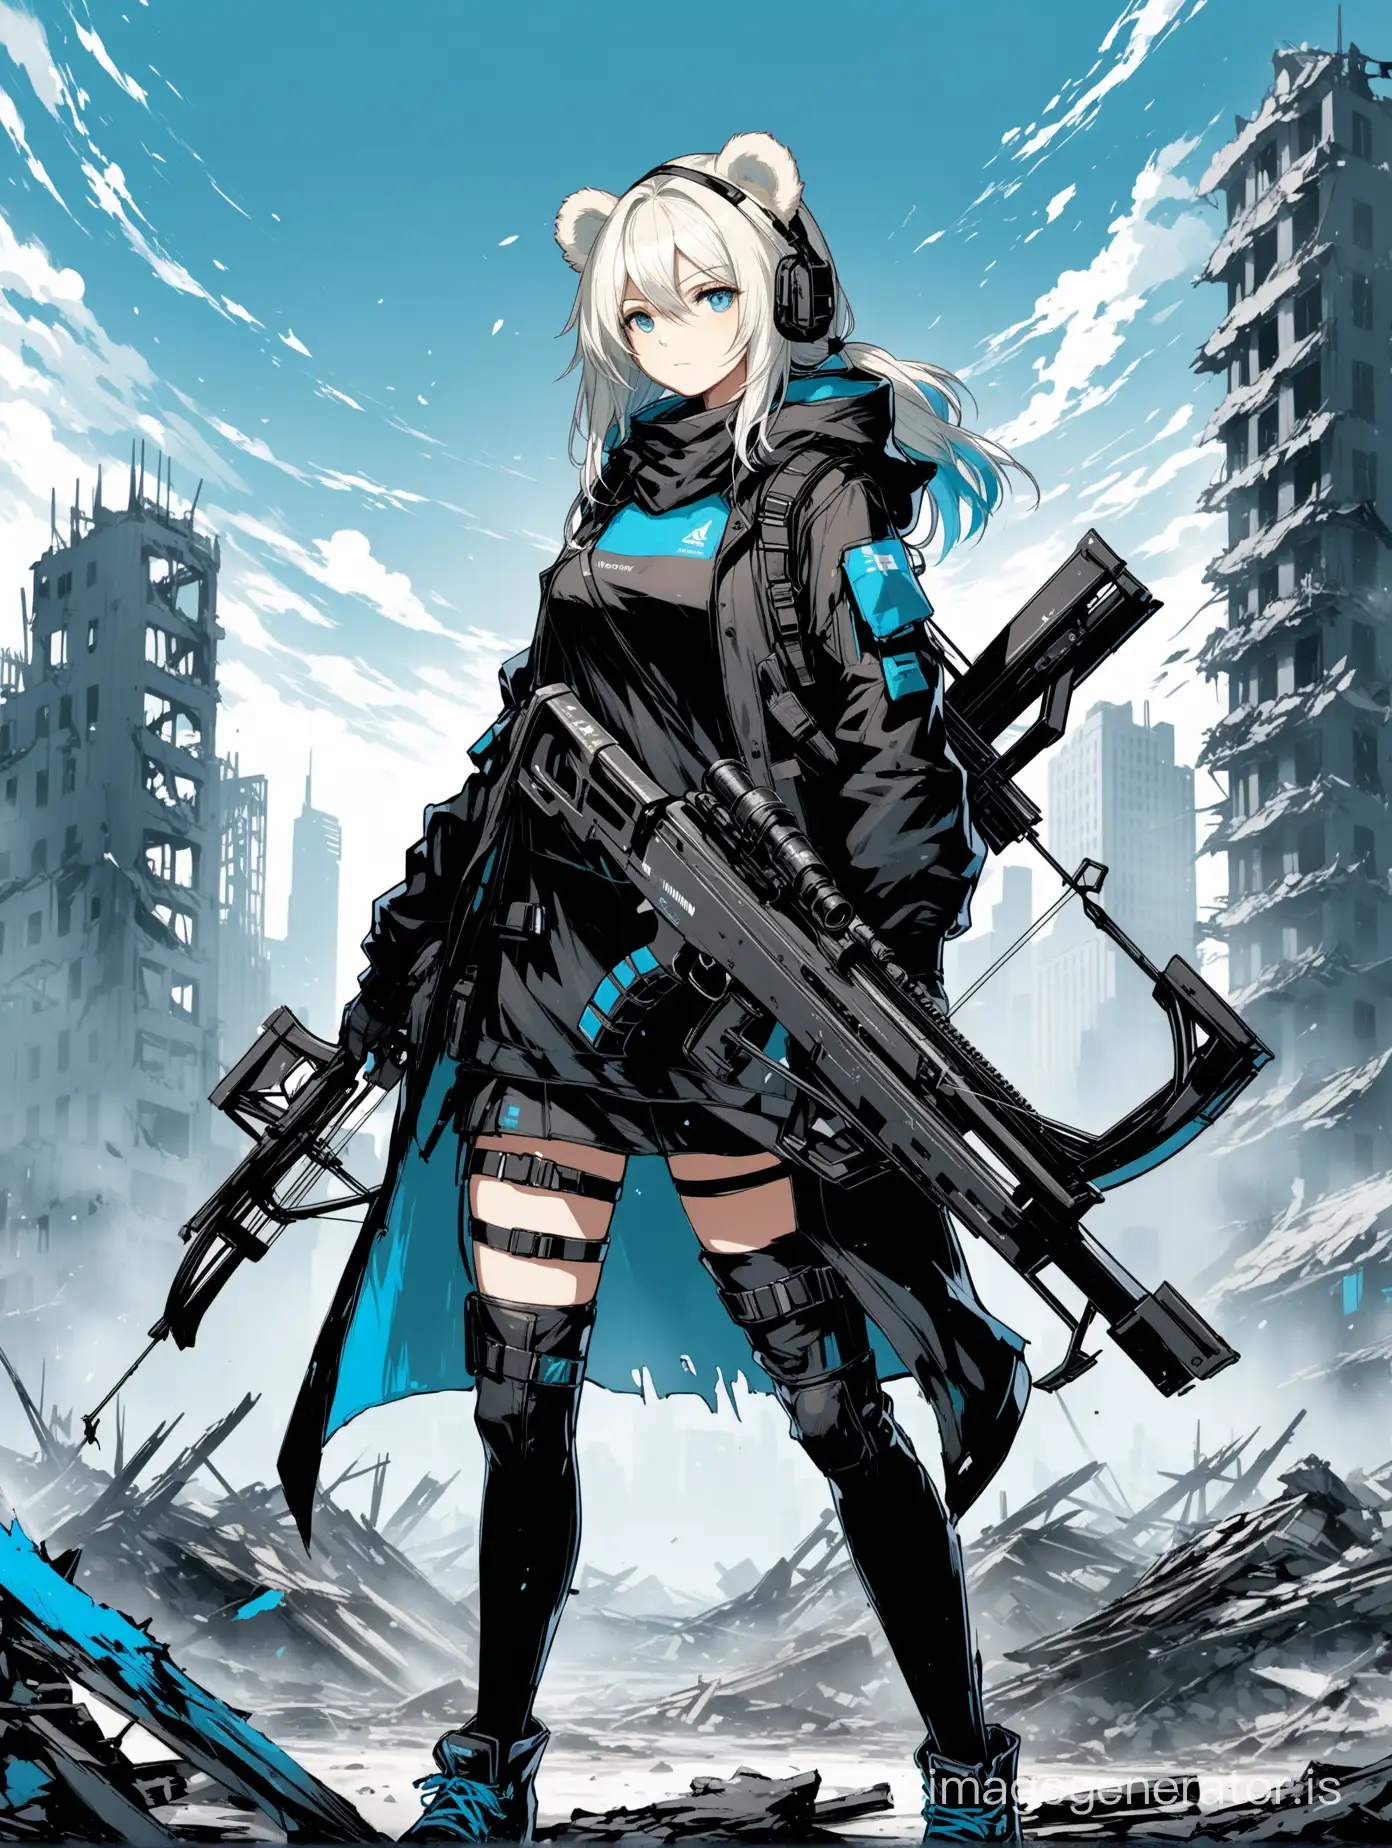 Ursus-Girl-with-Platinum-Hair-and-Crossbow-in-PostApocalyptic-Cityscape